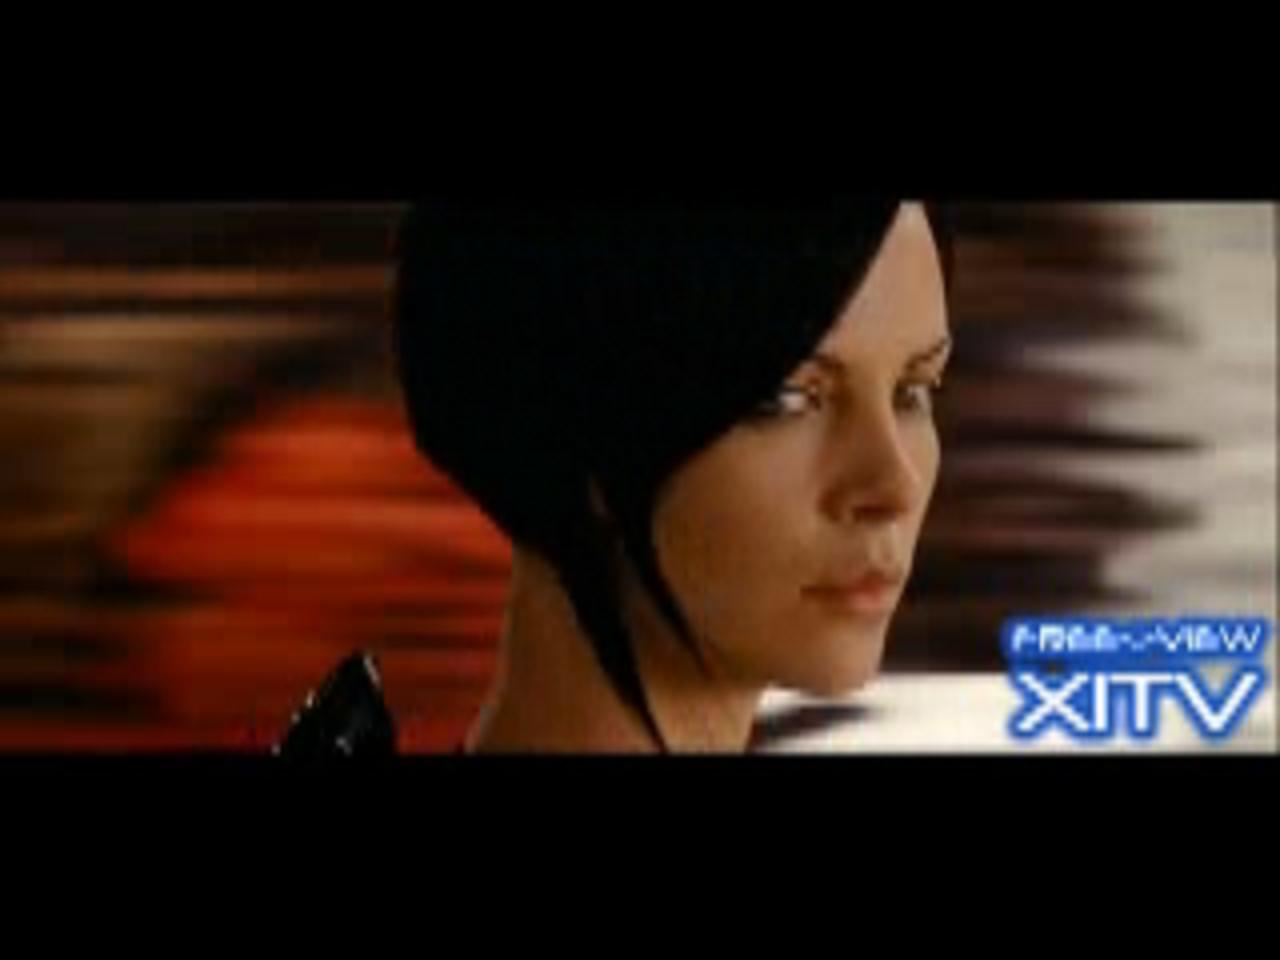 XITV FREE <> VIEW Aeon Flux! Starring Charlize Theron! XITV Is Must See TV!